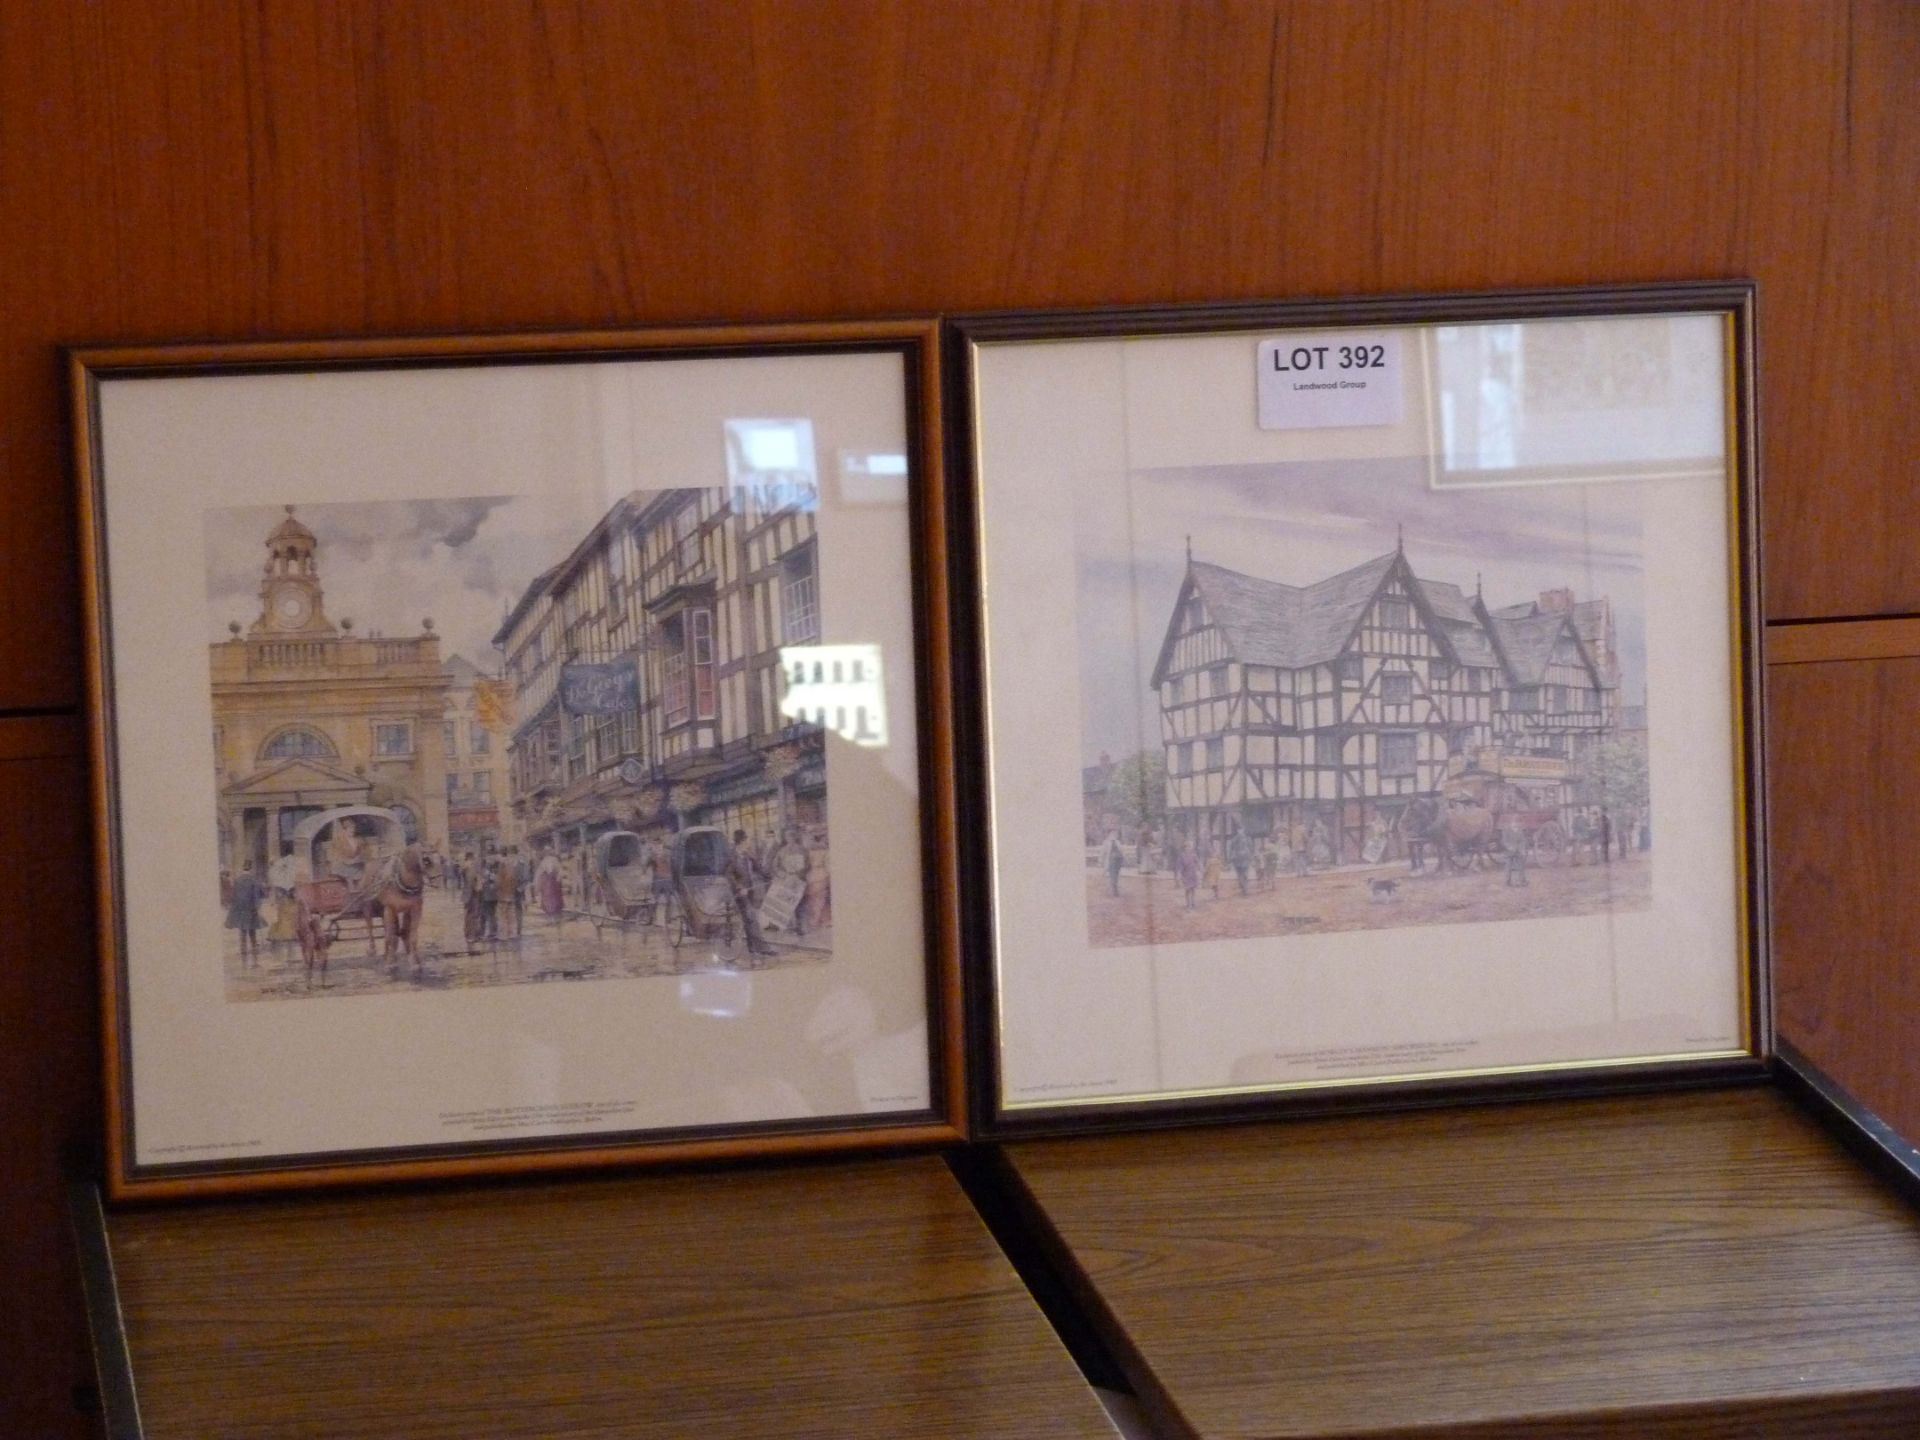 Print of 'Rowley Mansion Shrewsbury' and 'The Butter cross Ludlow' both by Brian Eden